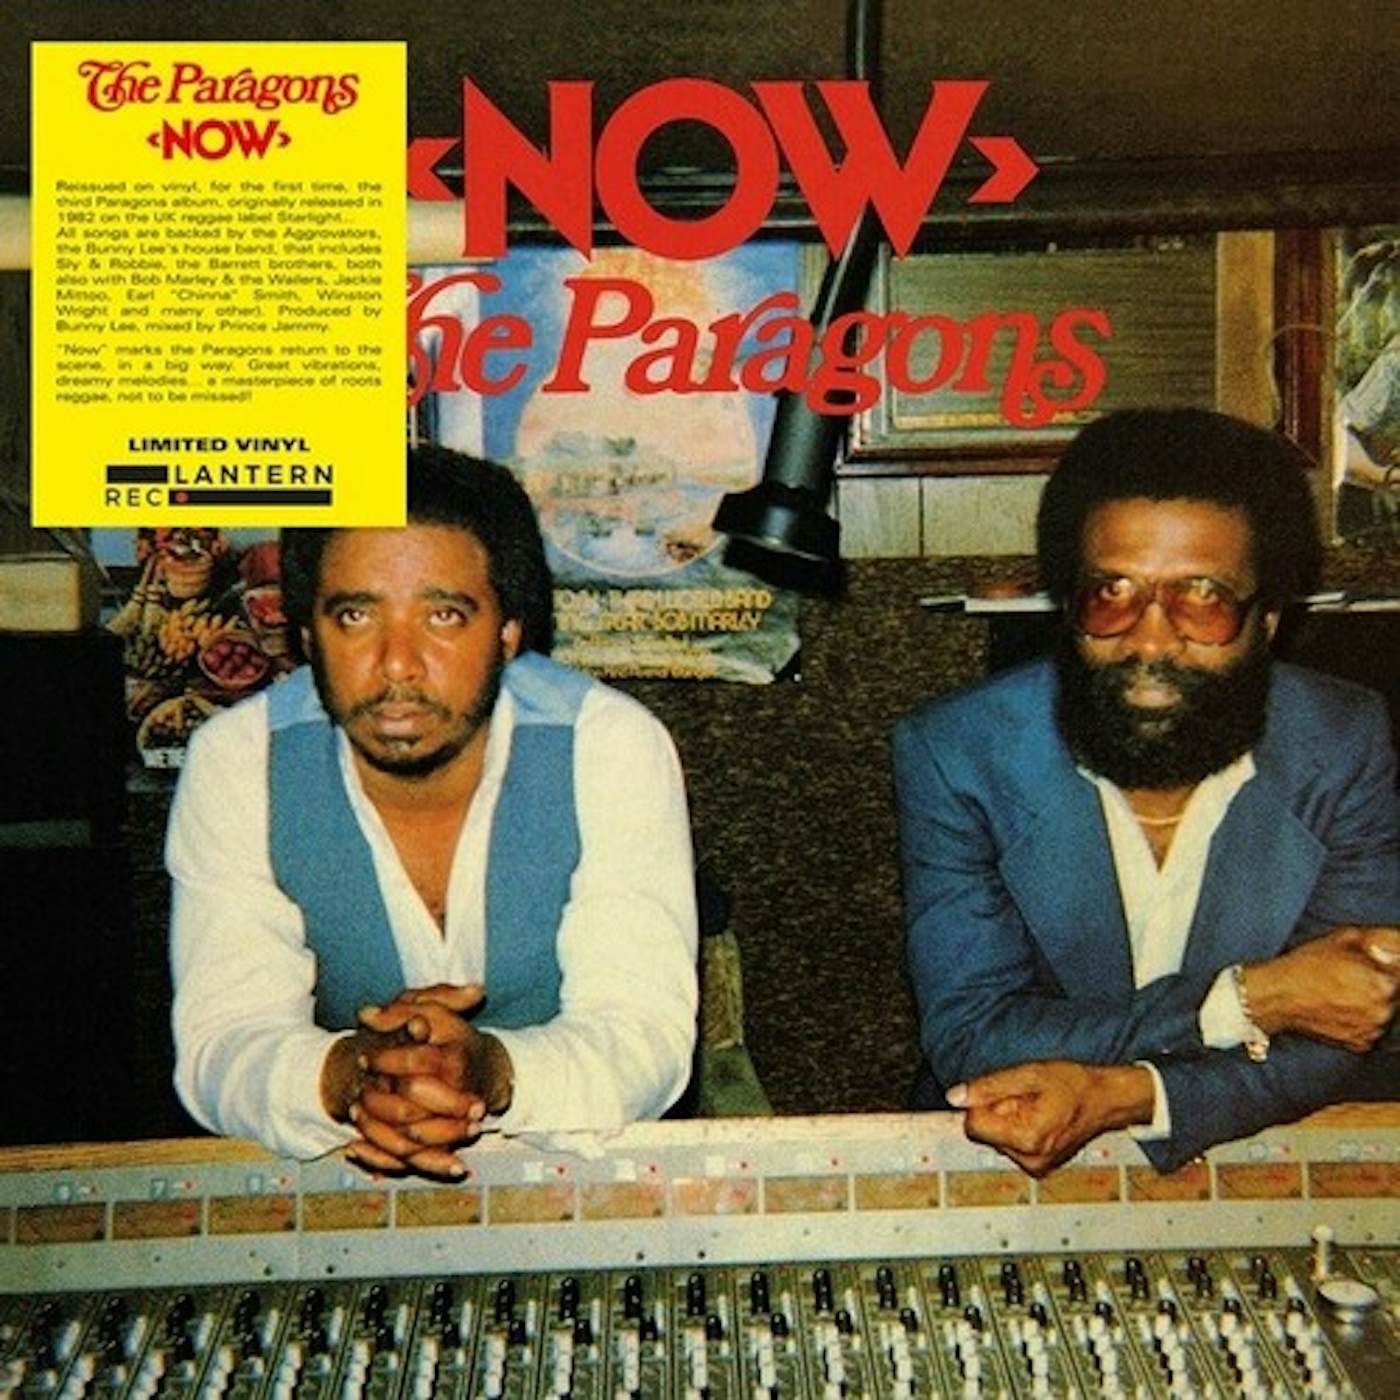 The Paragons NOW Vinyl Record